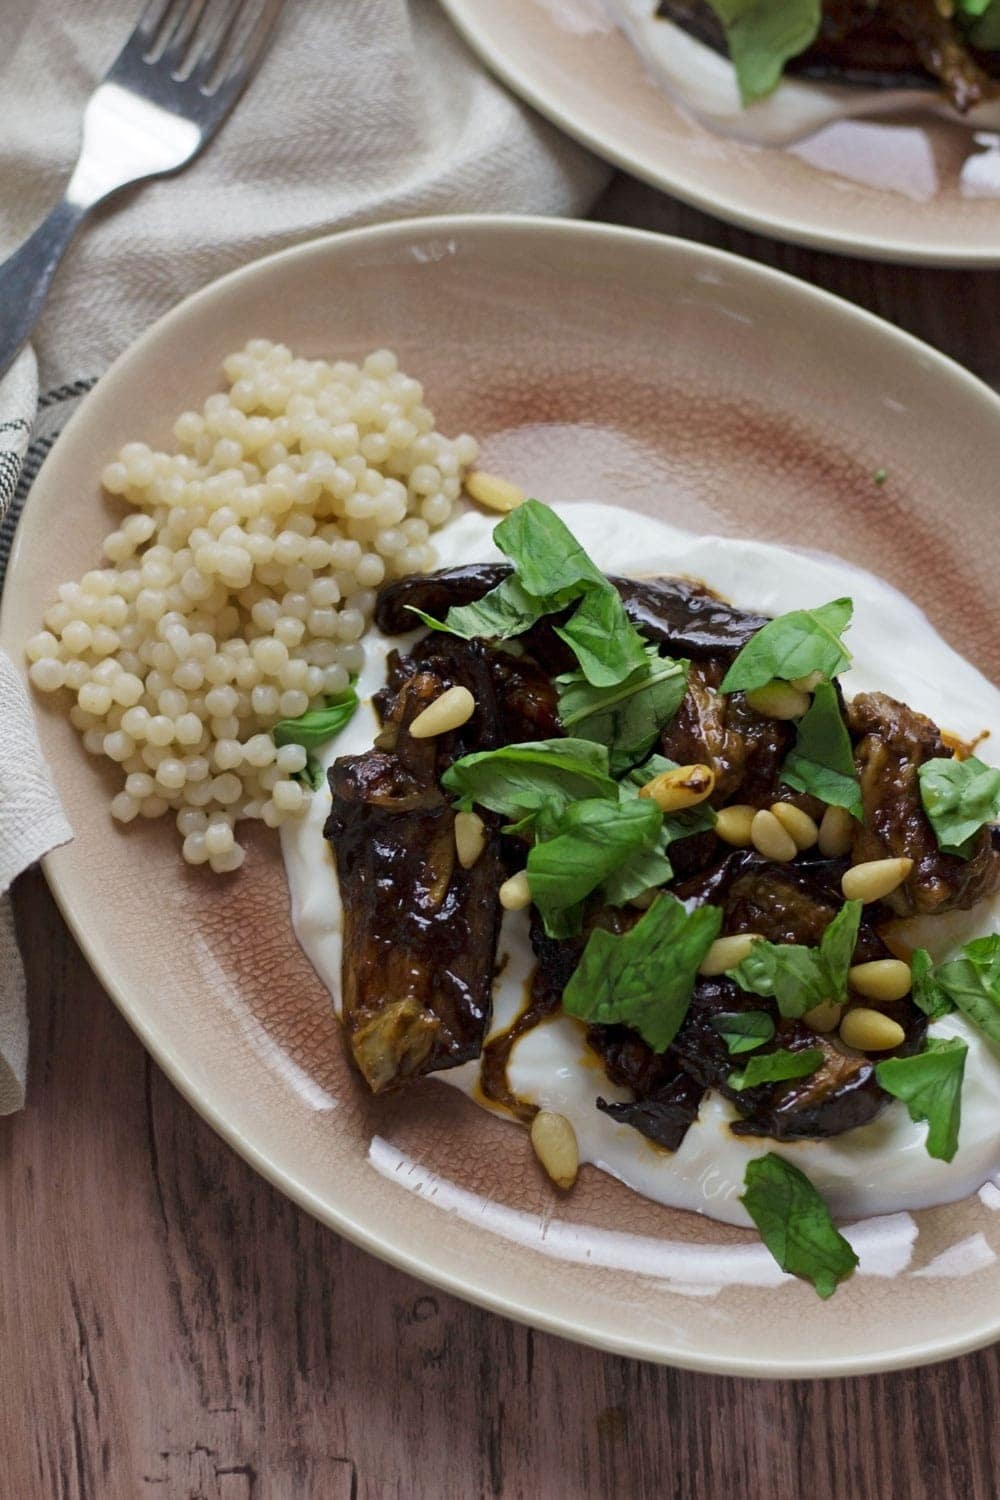 This roast aubergine gets a rich balsamic flavour from the black garlic cooled down by a bed of Greek yoghurt. Serve with Israeli couscous.